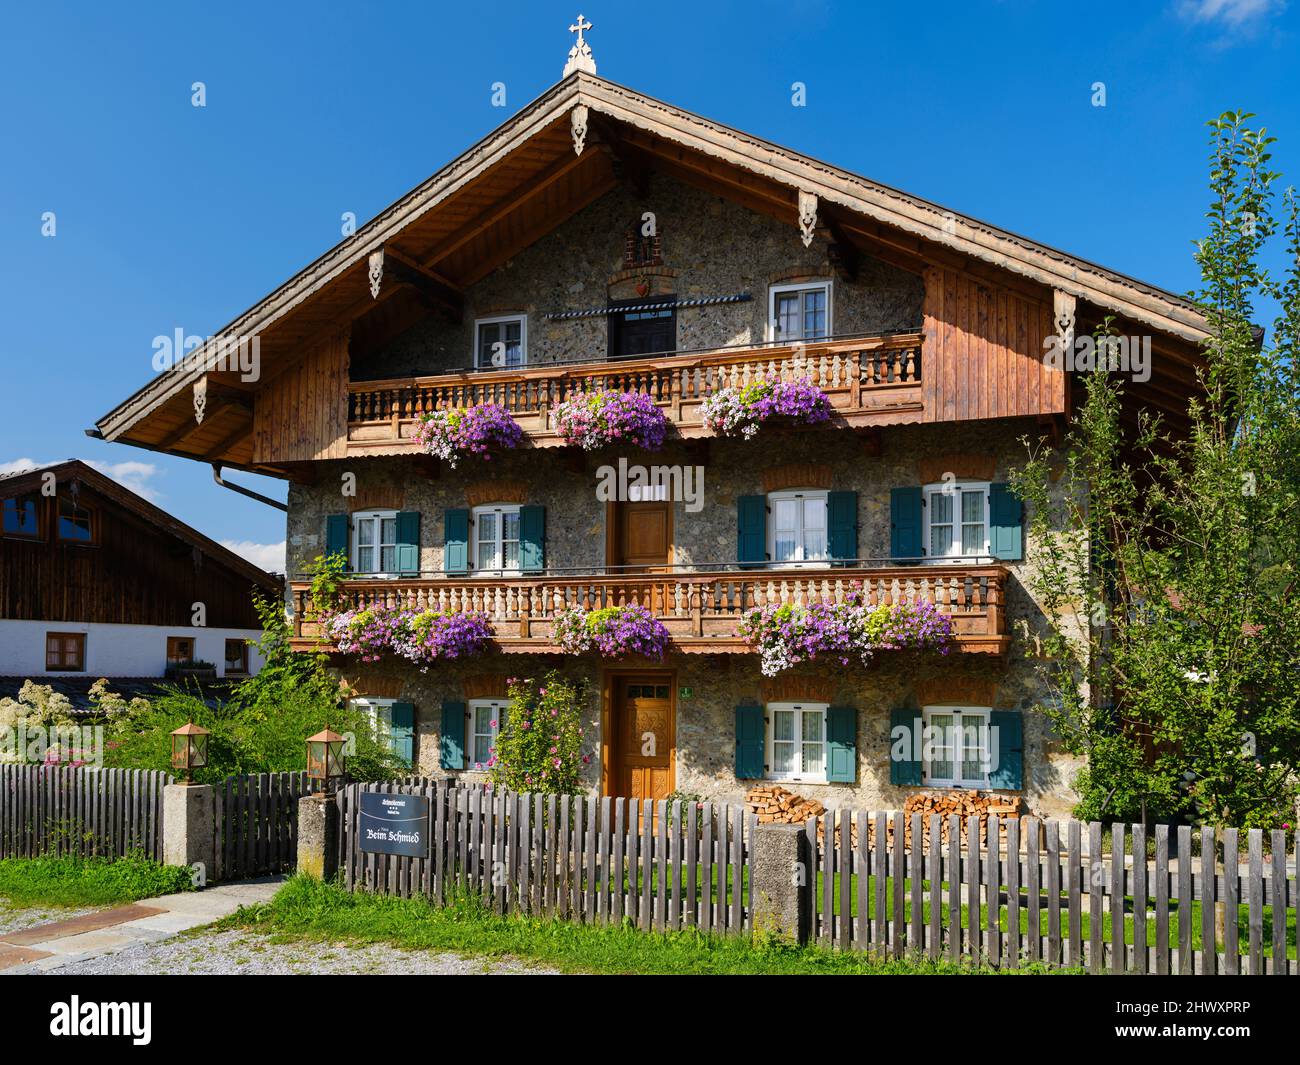 Typical house of the Chiemgau district in village Nussdorf, valley of the Inn near Rosenheim. Bavaria, Germany Stock Photo